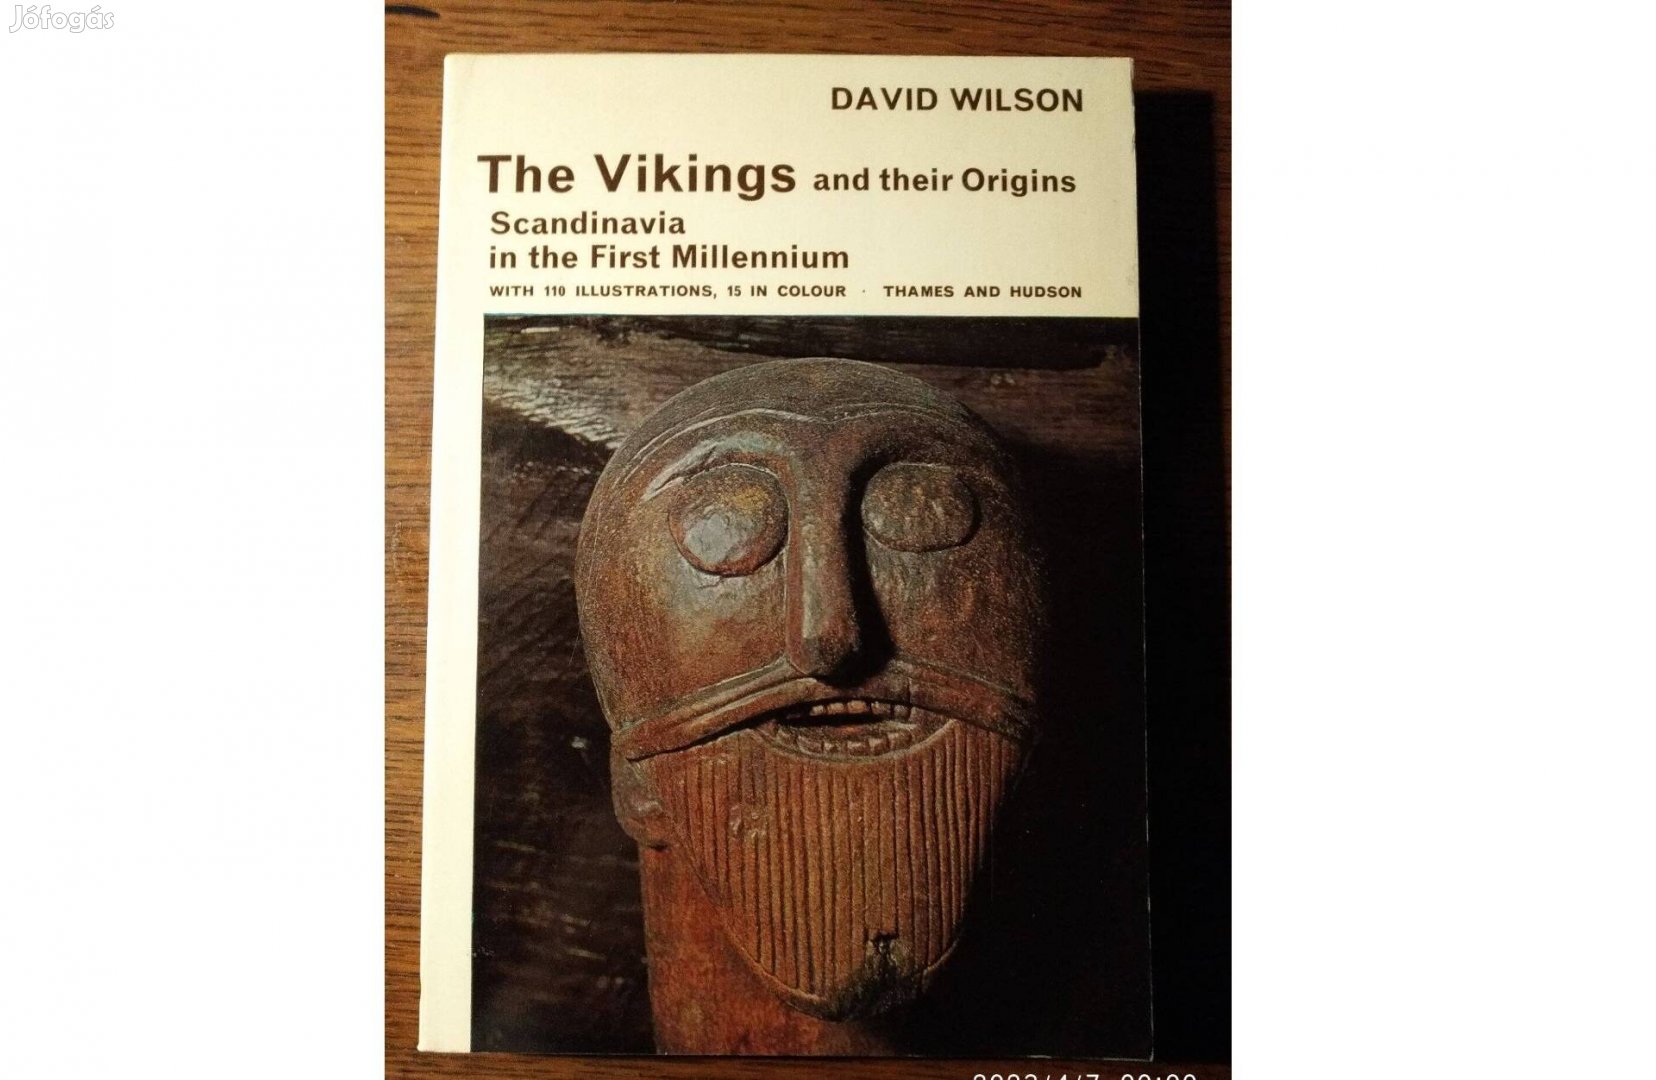 The Vikings and their Origins - Scandinavia in the first Millenium Dav